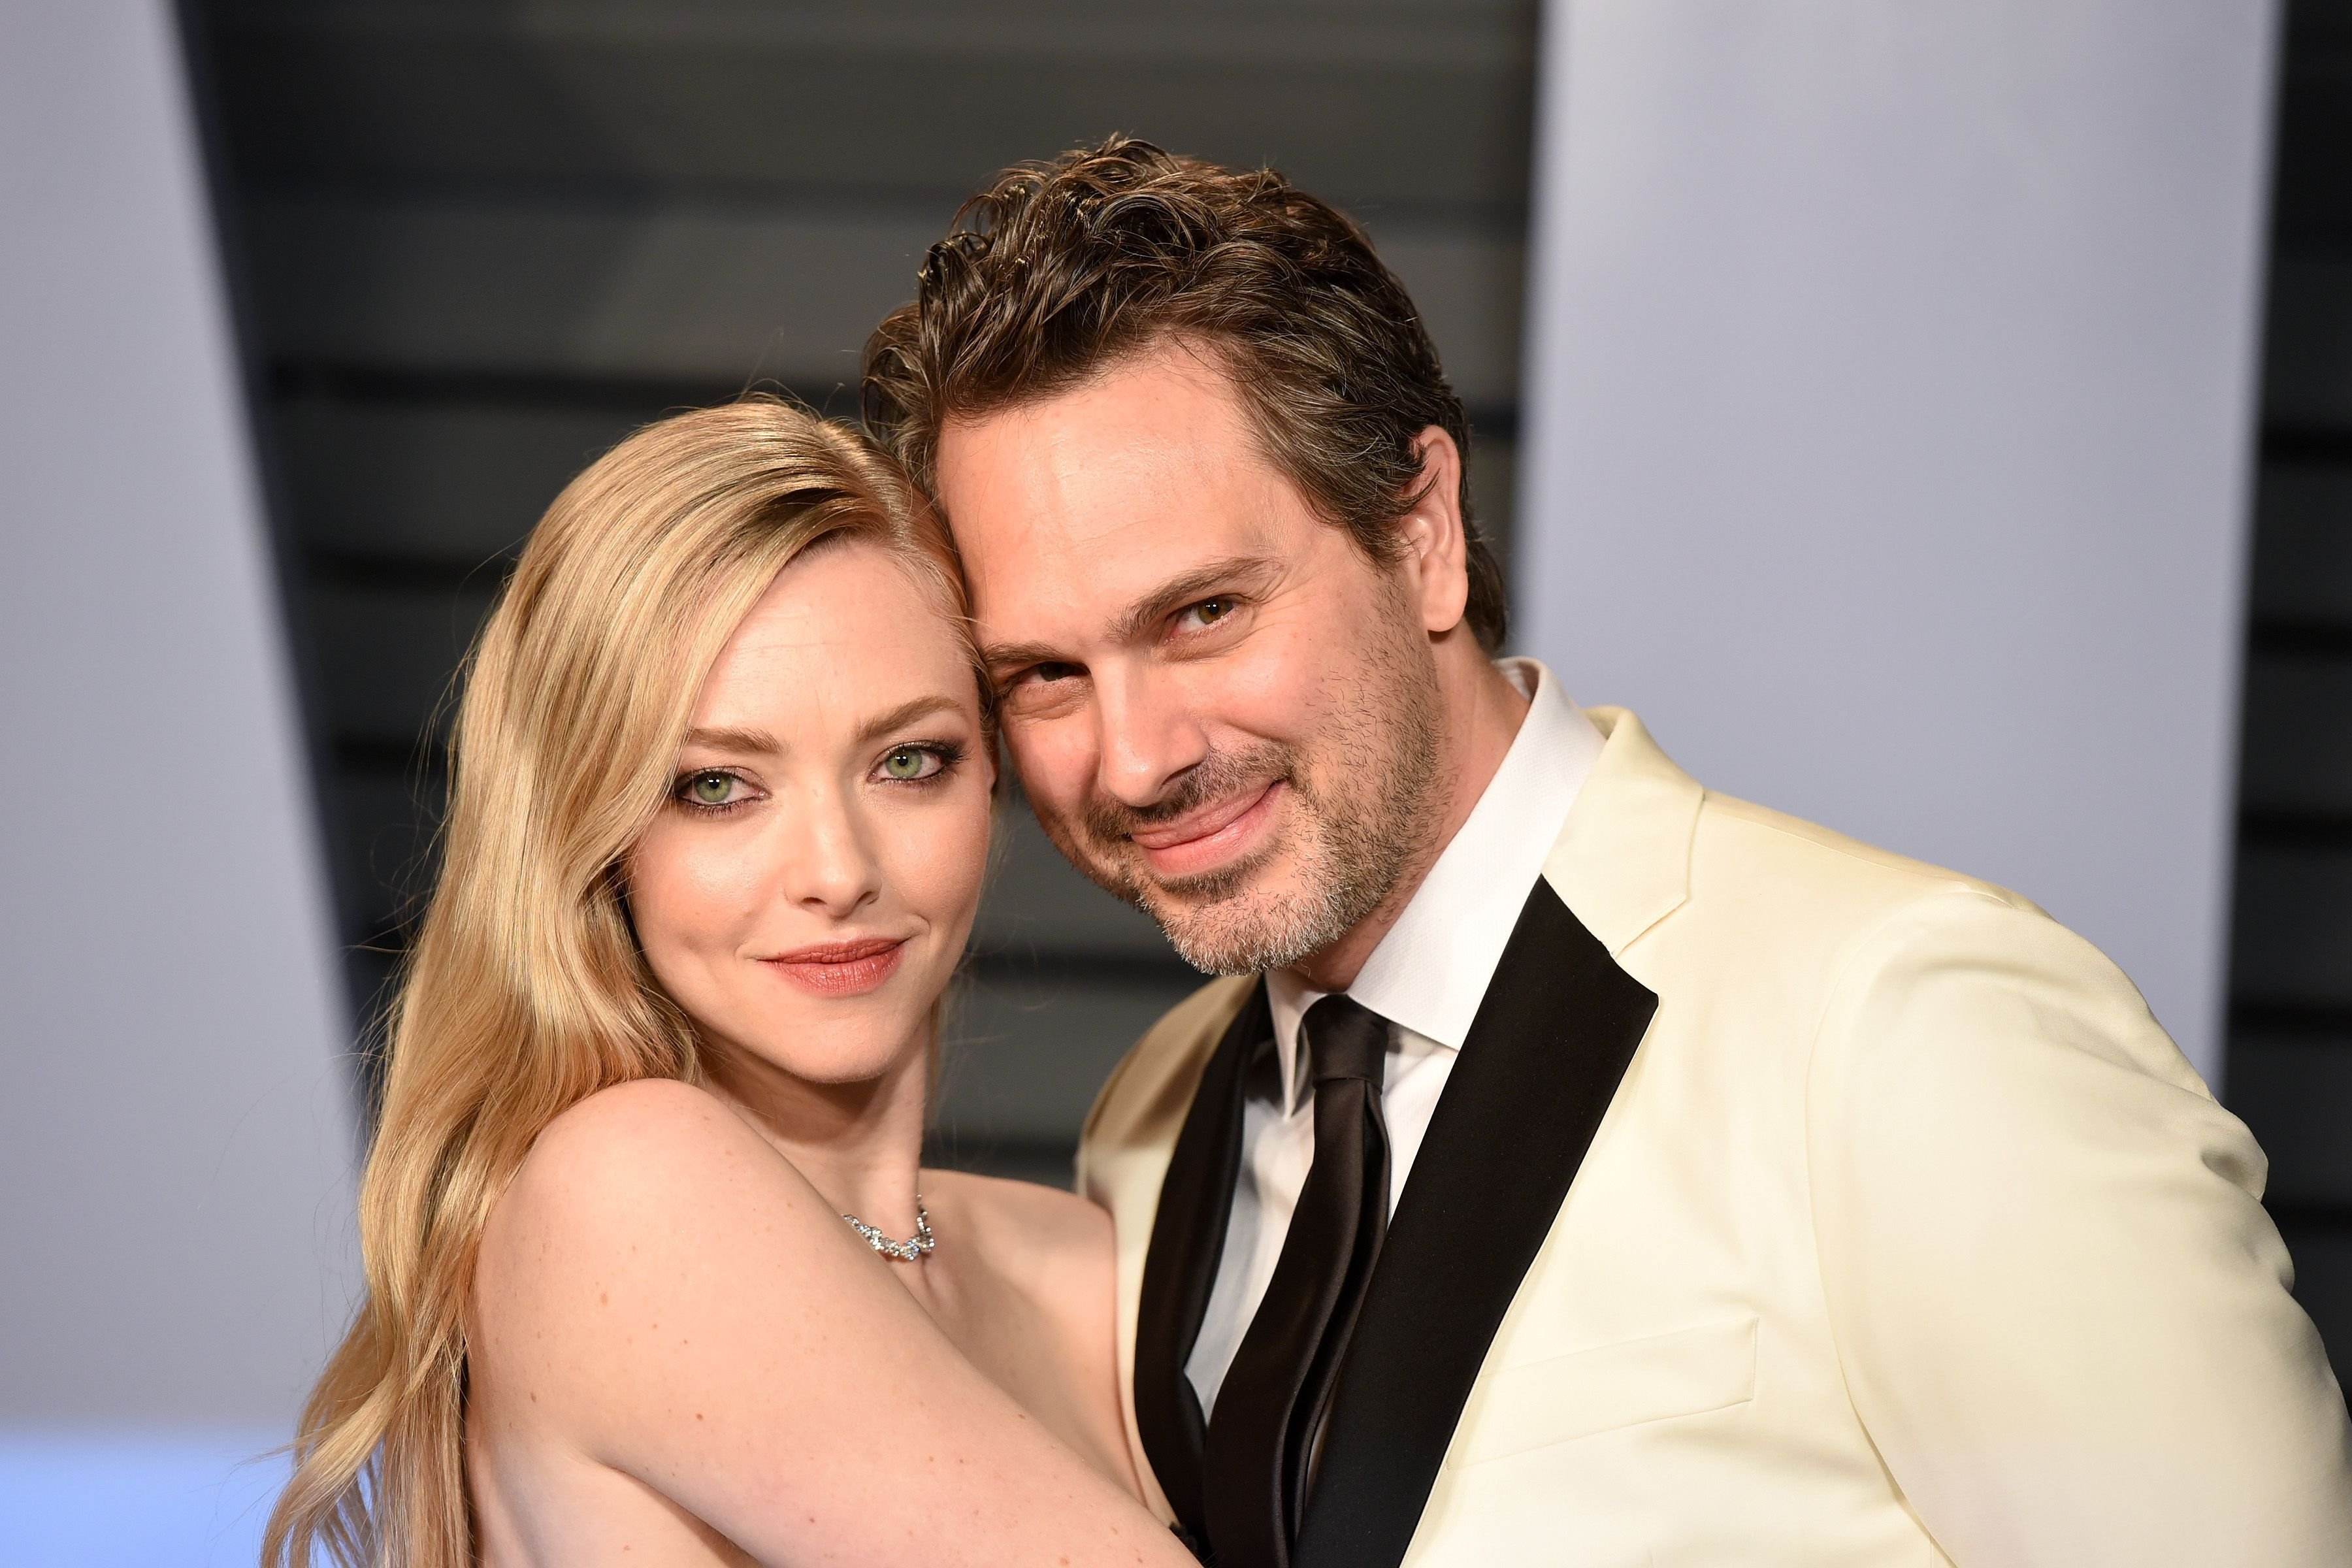 Amanda Seyfried and Thomas Sadoski at Wallis Annenberg Center for the Performing Arts on March 4, 2018 in Beverly Hills, CA. | Photo: Getty Images